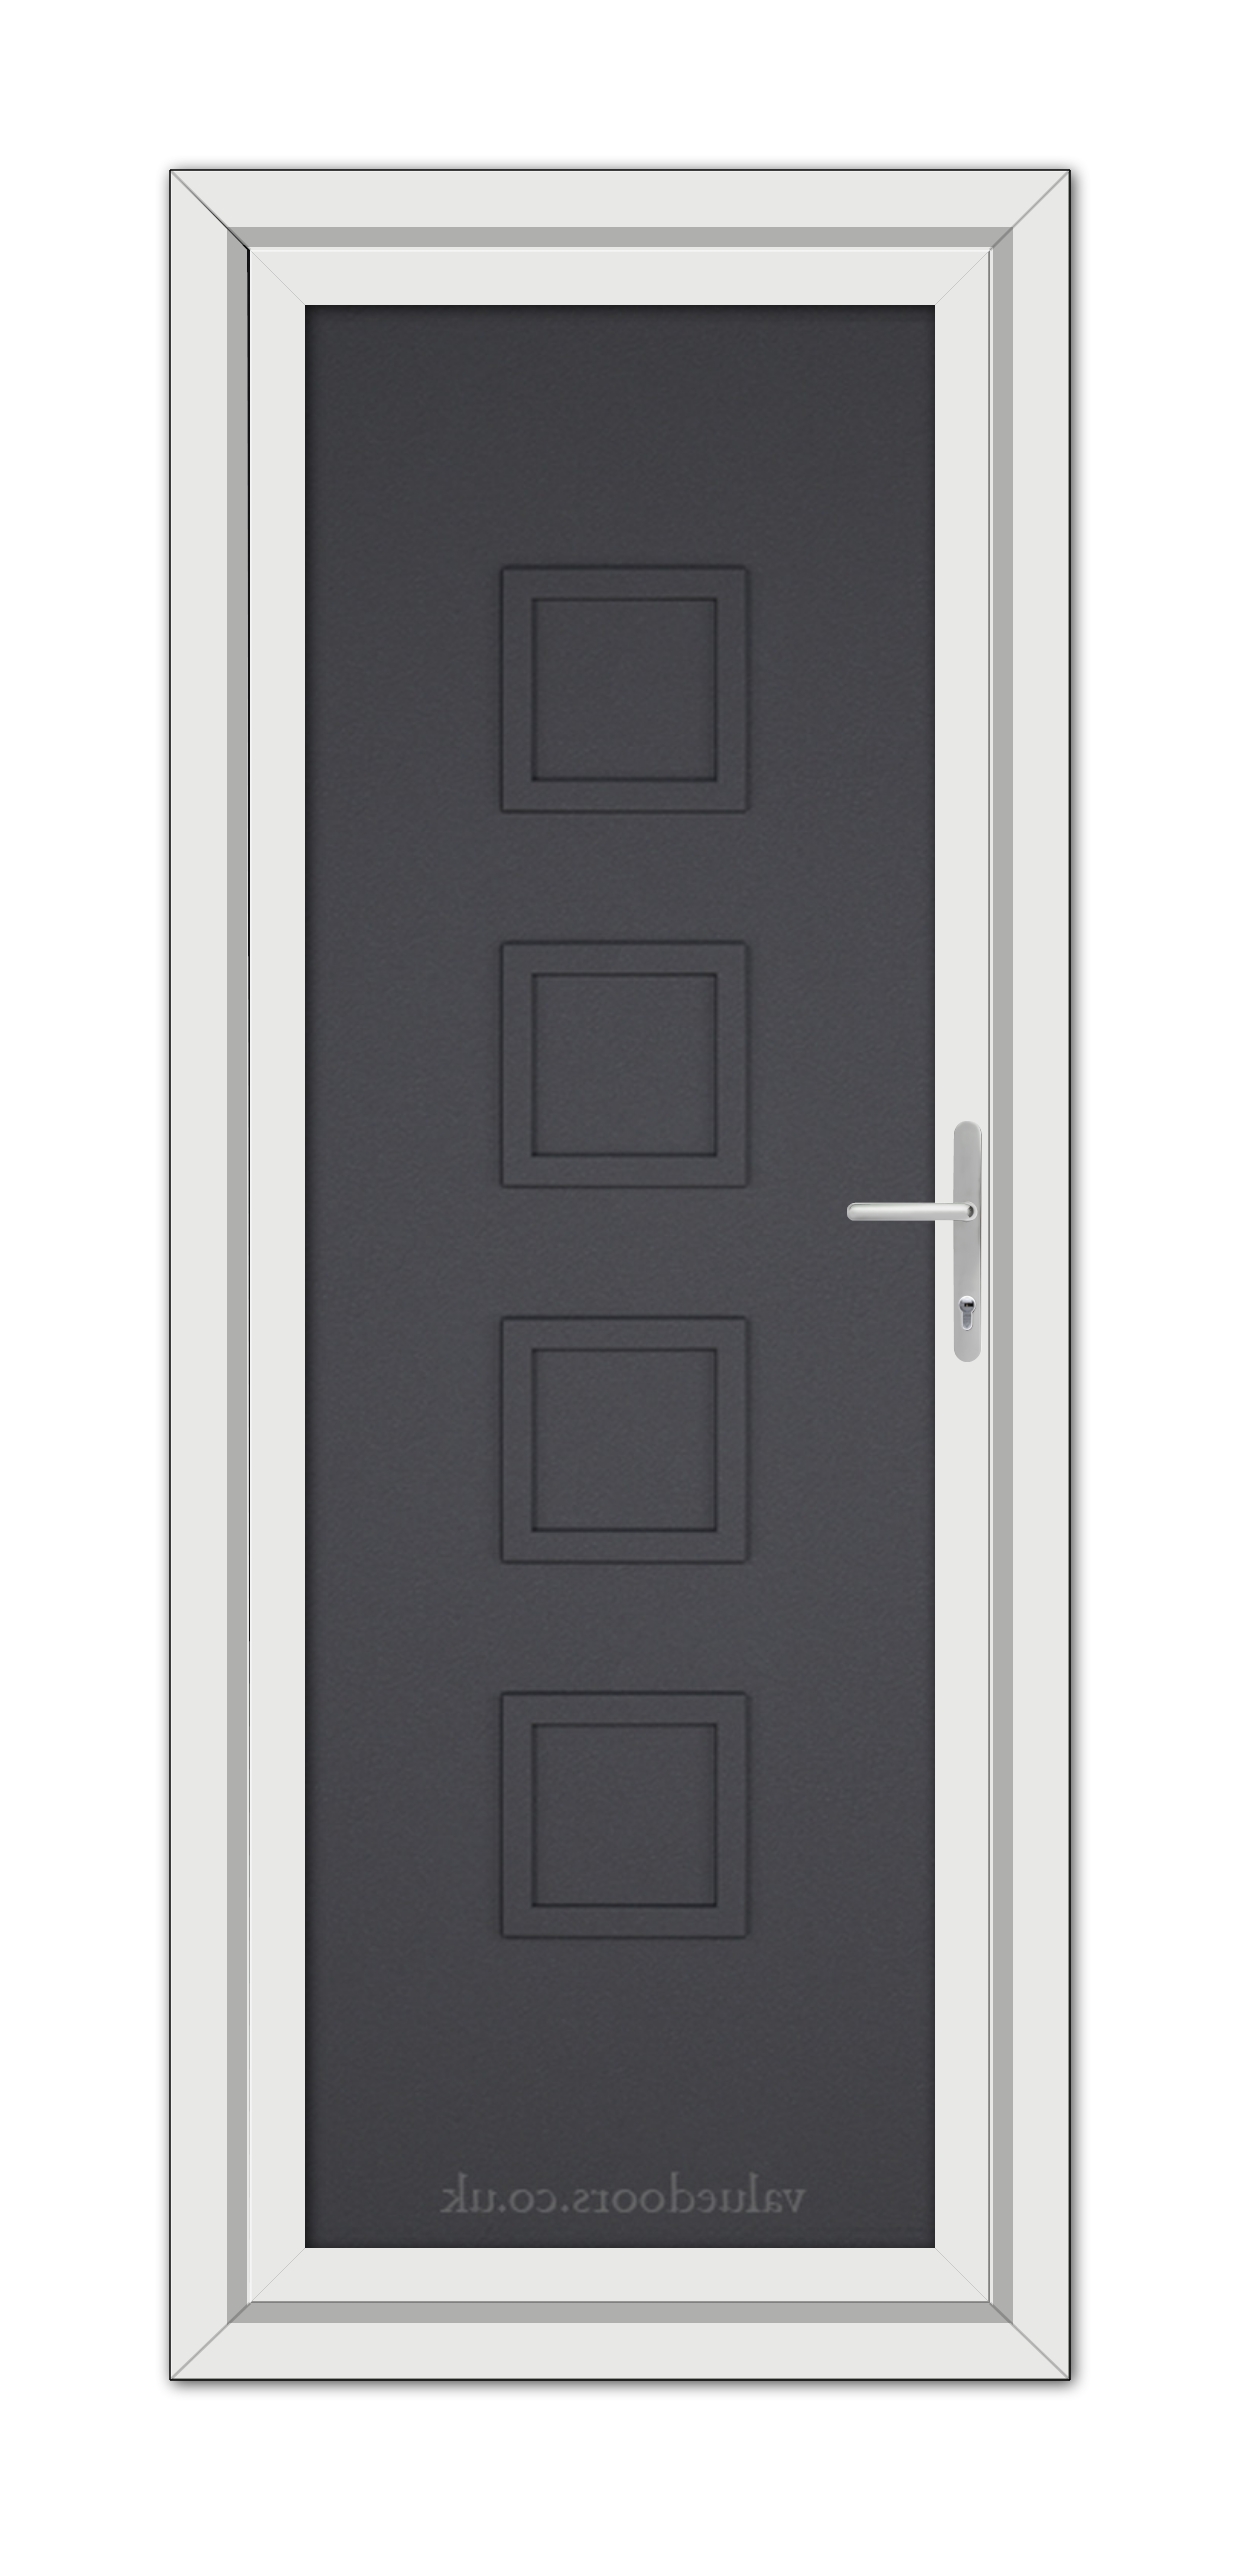 A Grey Grained Modern 5034 Solid uPVC door featuring five rectangular panels, a metallic handle on the right, and framed within a white doorframe.